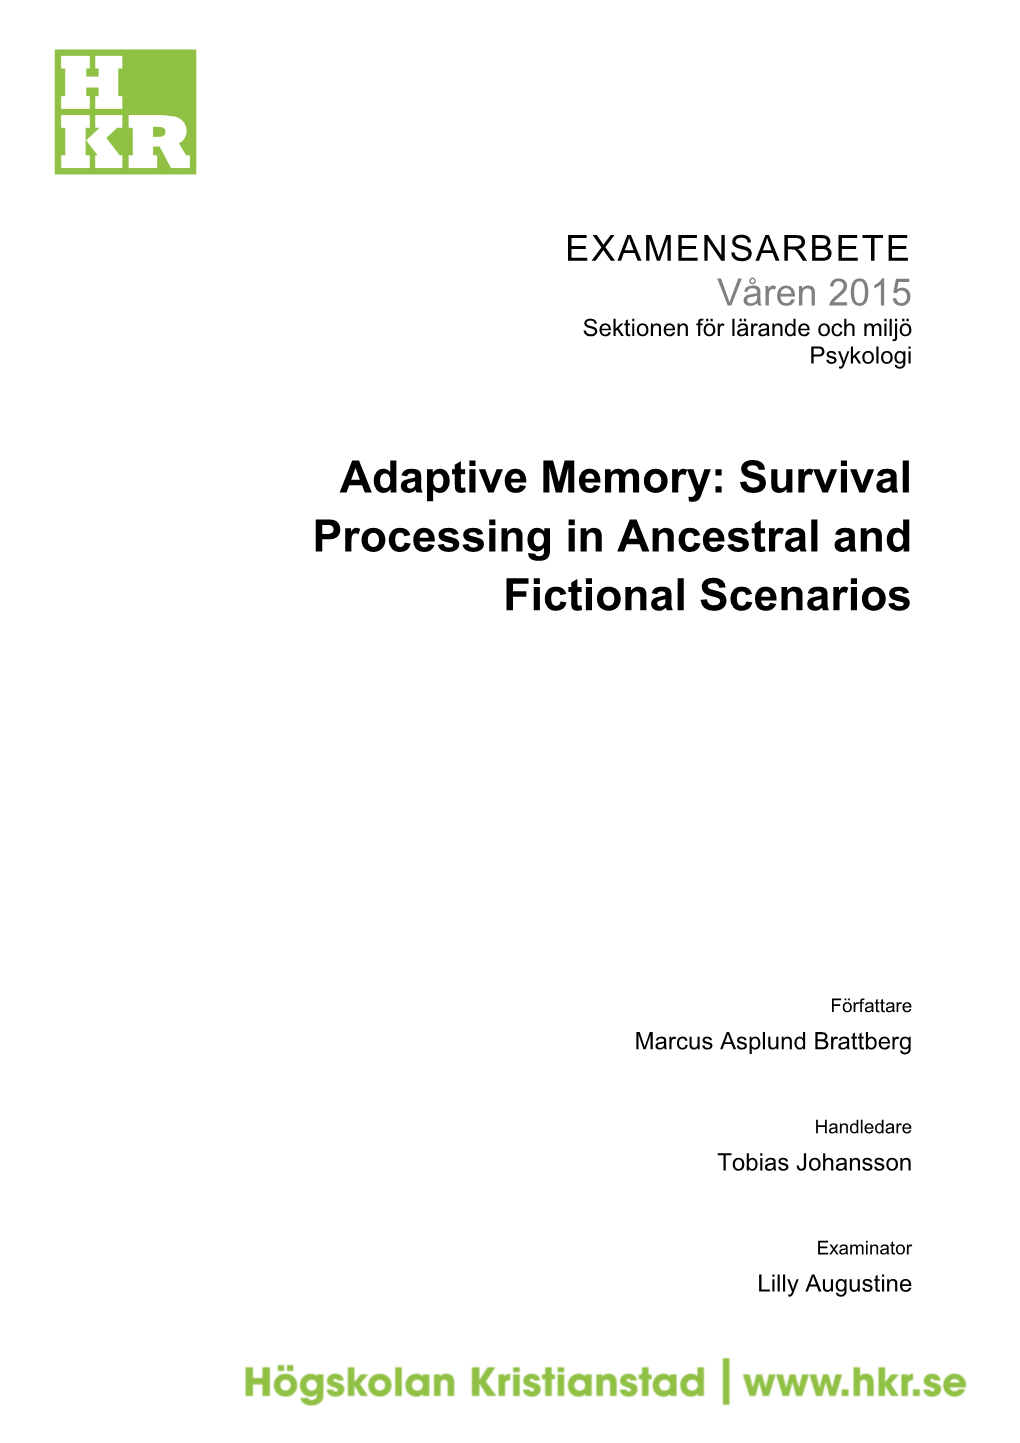 Adaptive Memory: Survival Processing in Ancestral and Fictional Scenarios